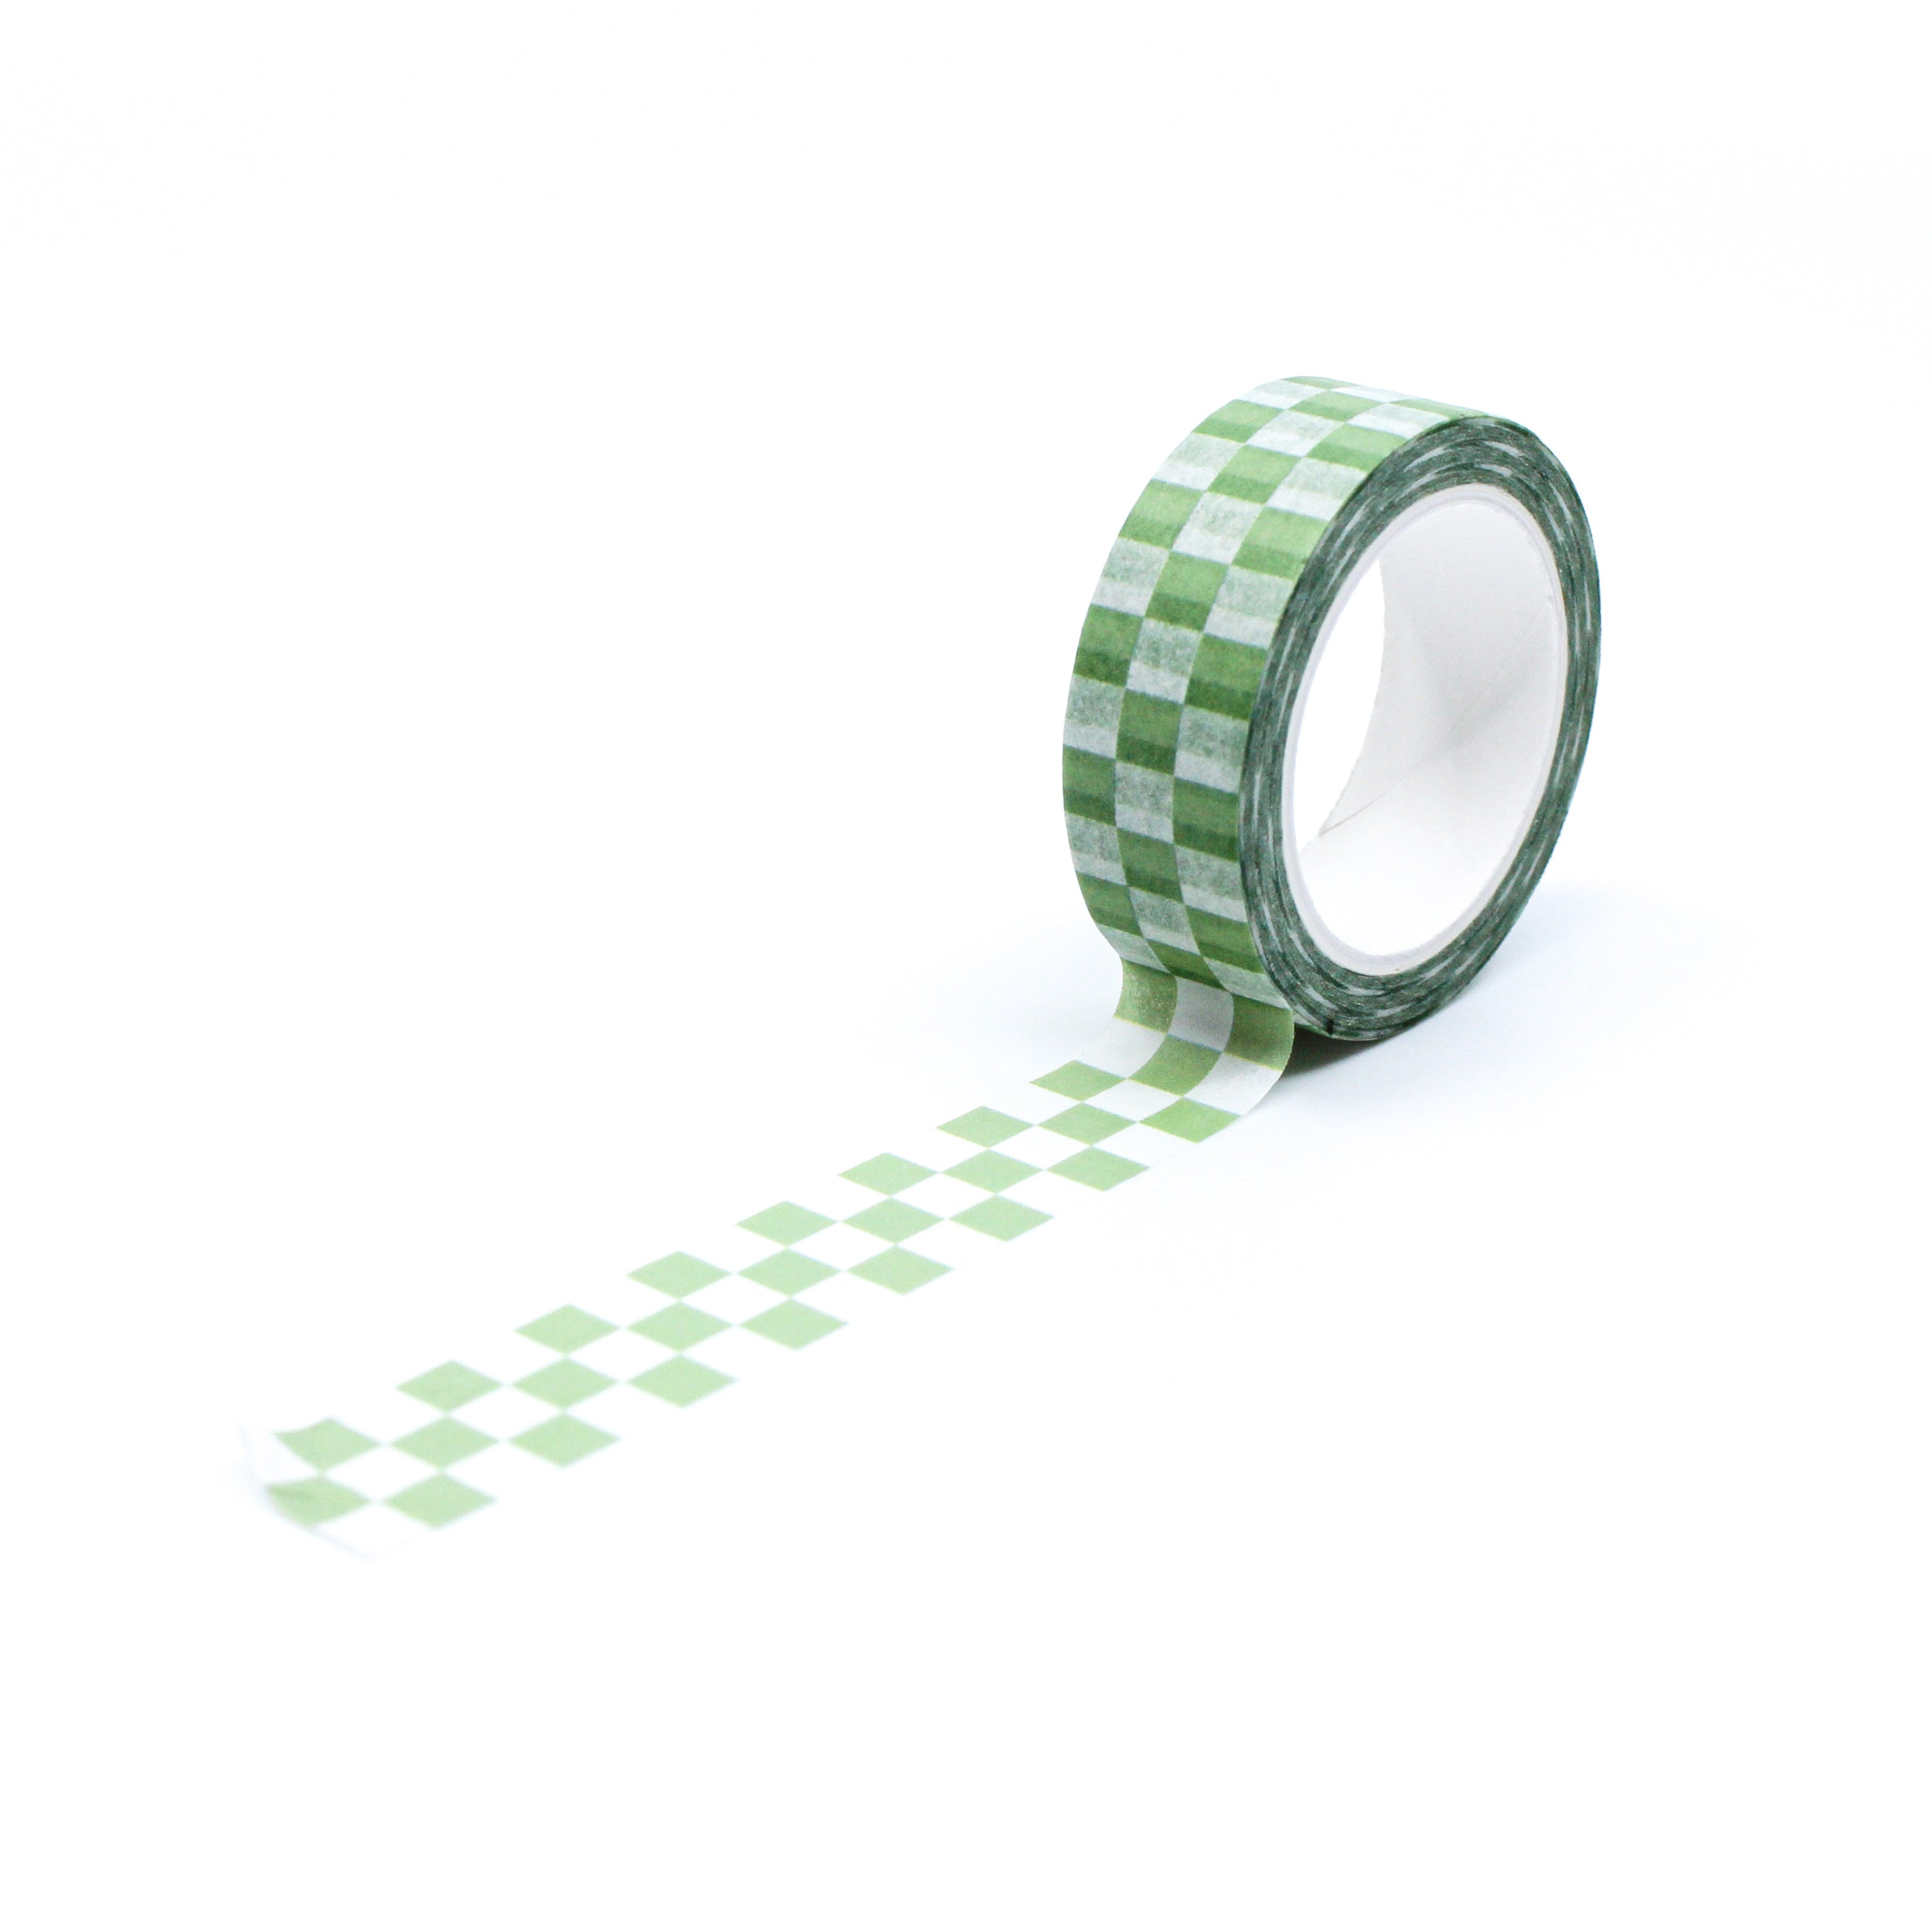 This is a full pattern repeat view of green checkerboard washi tape BBB Supplies Craft Shop